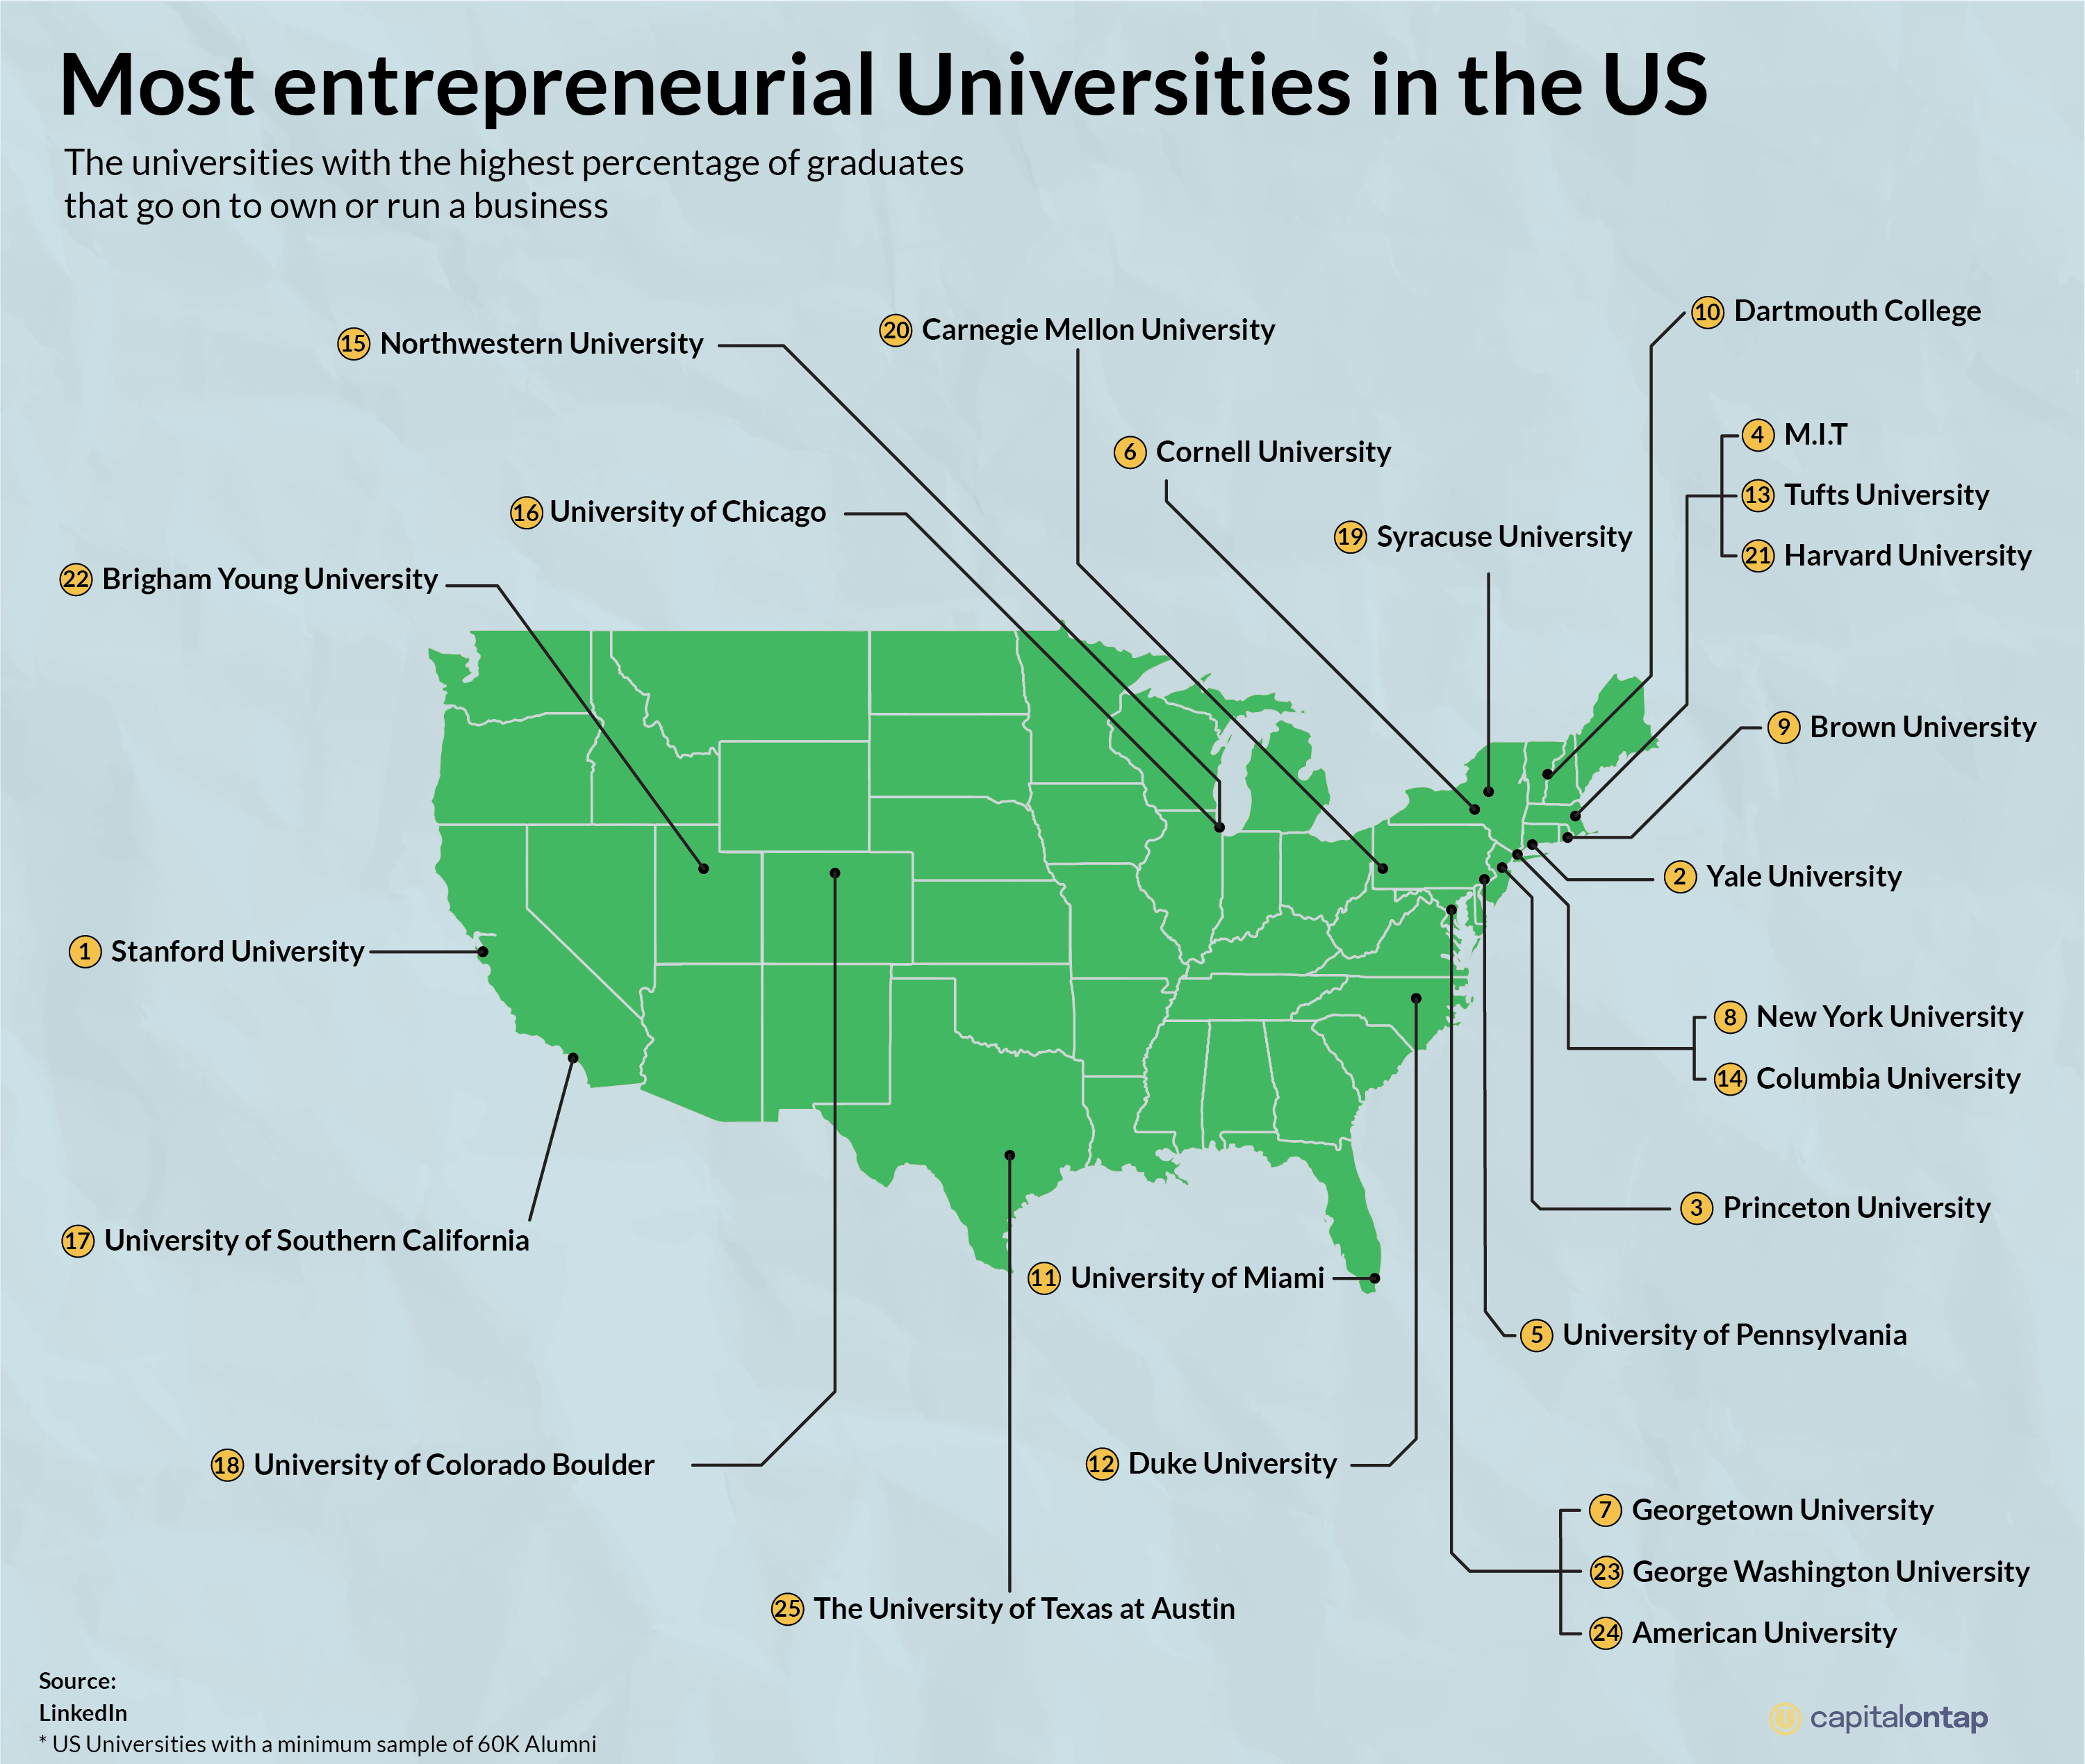 A map of the most entrepreneurial universities in the US